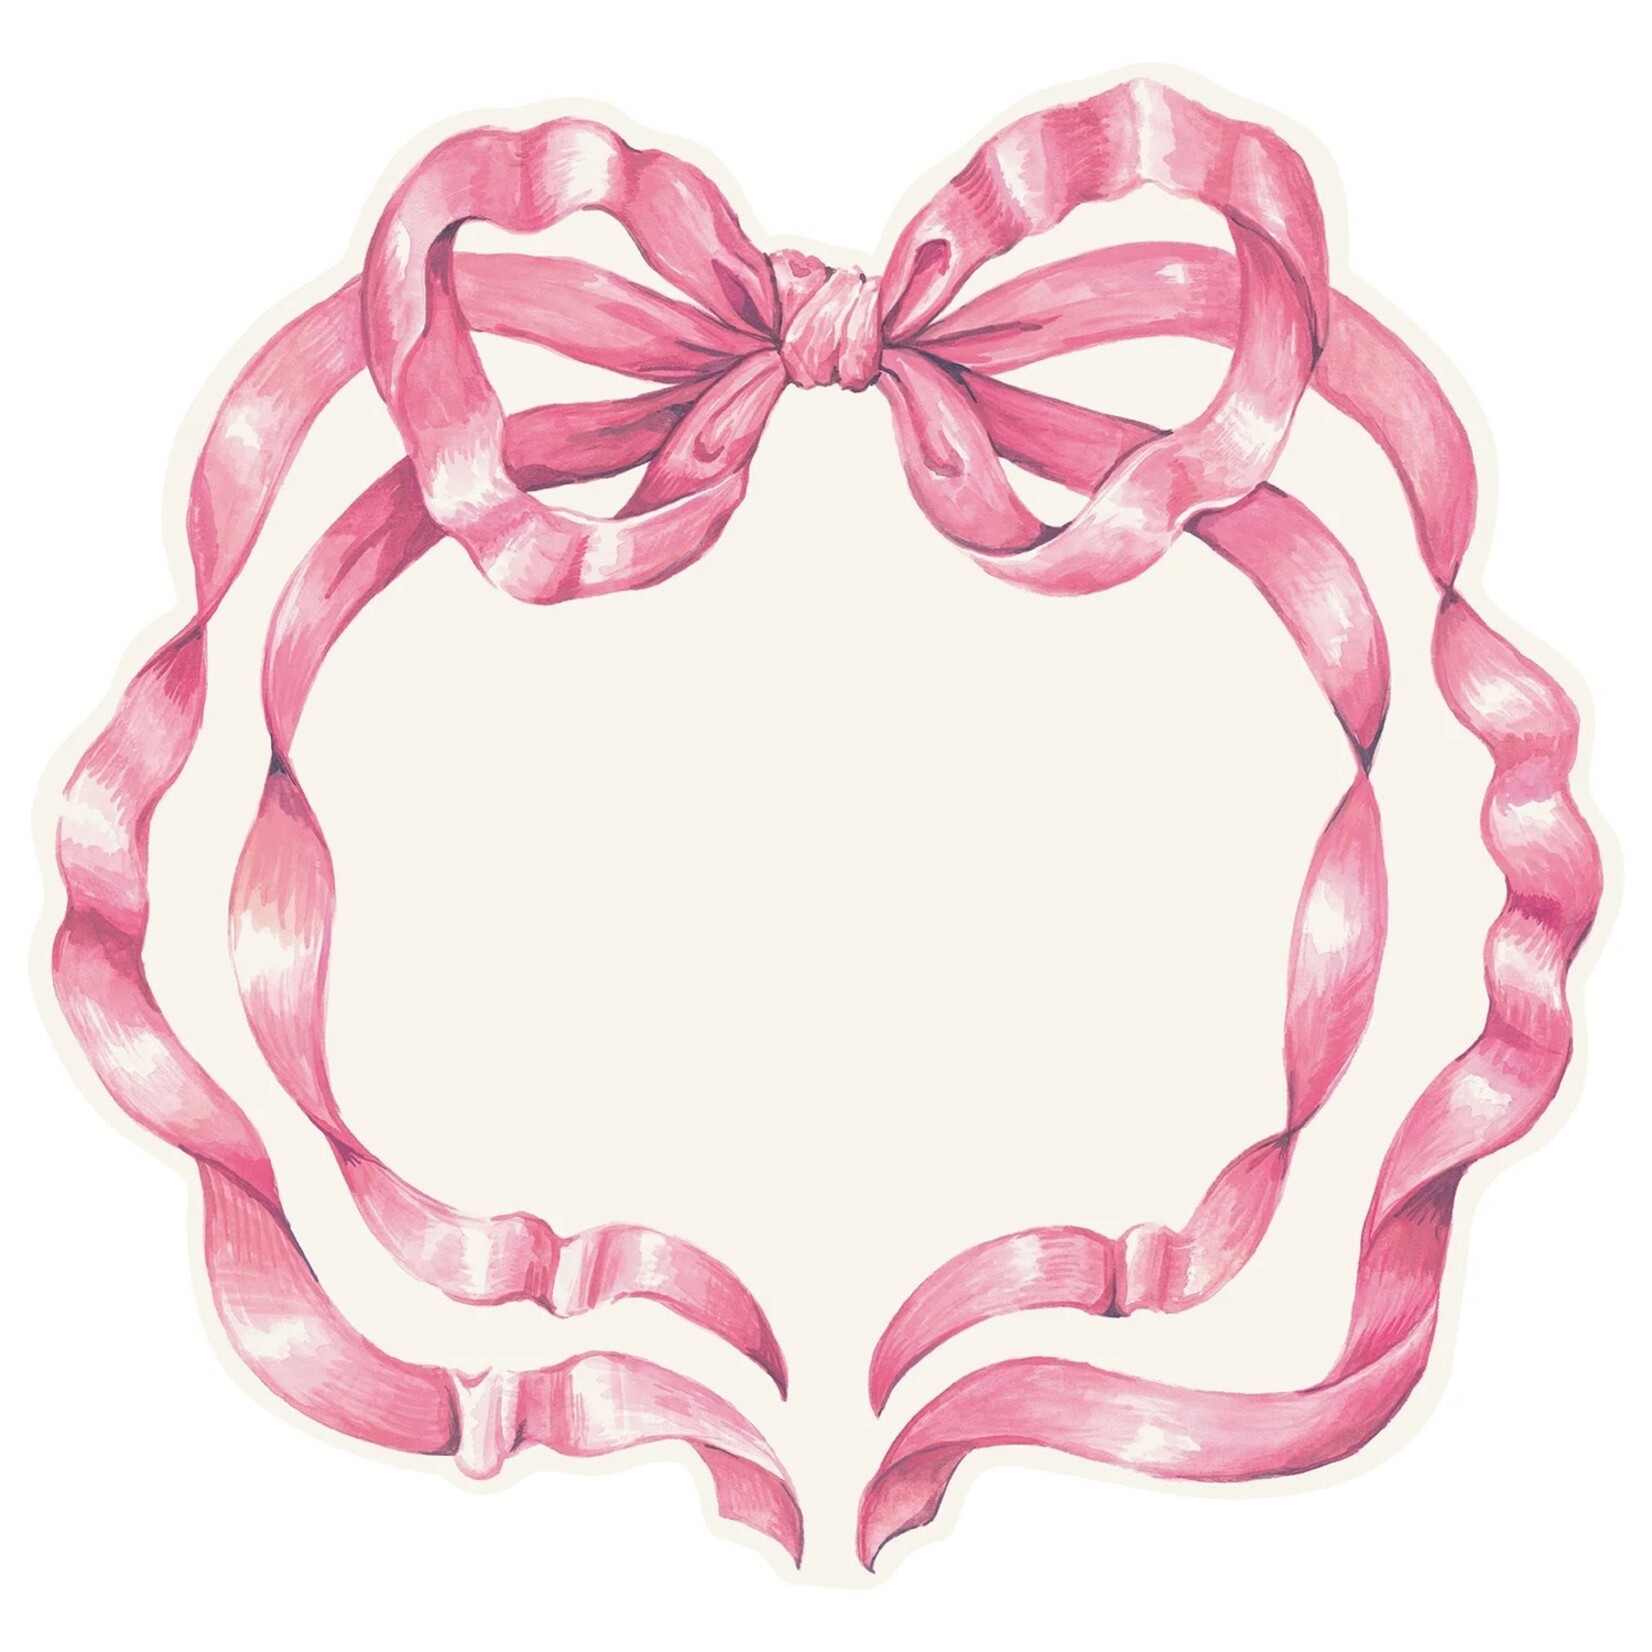 Hester & Cook Die-cut Pink Bow Placemat